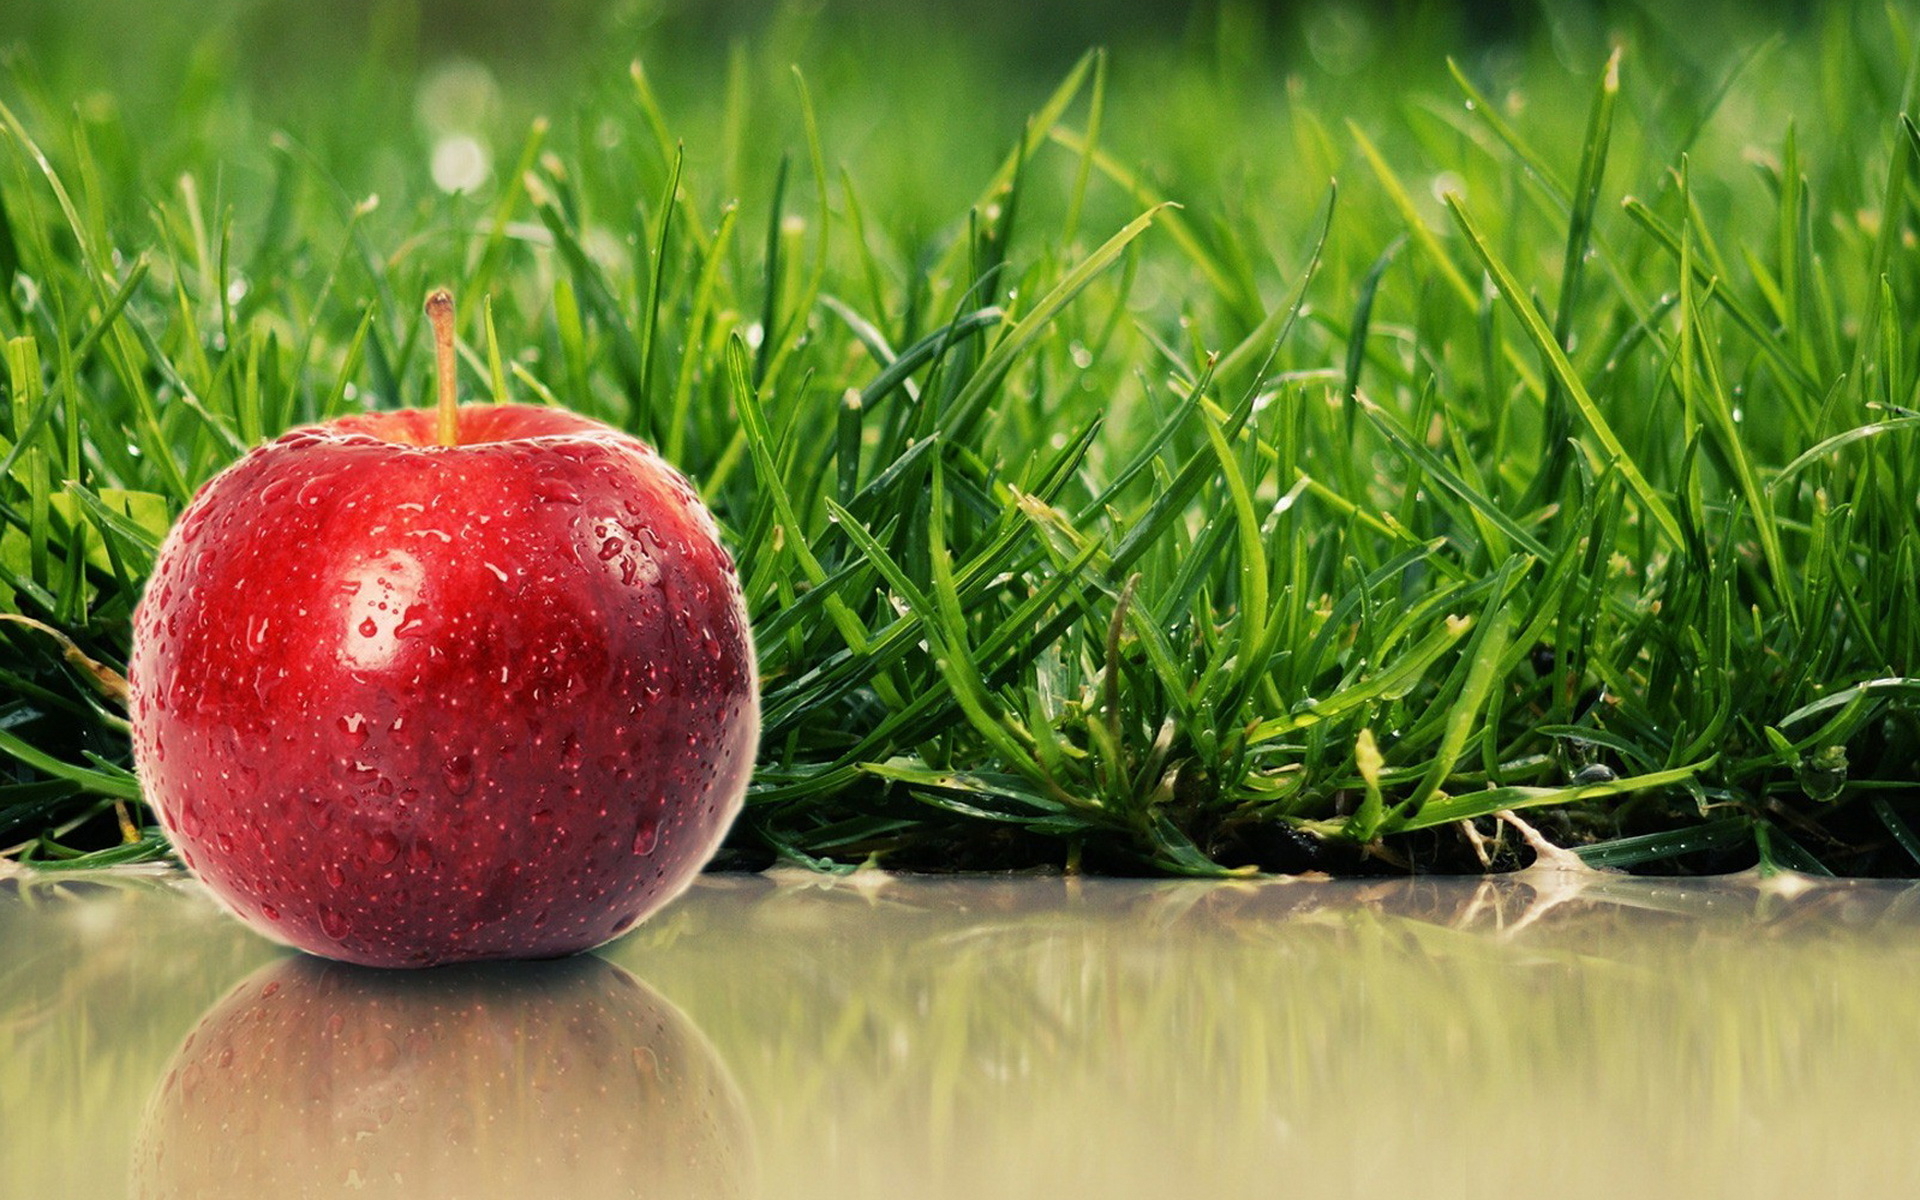 Sweet apple wallpapers and images - wallpapers, pictures ...